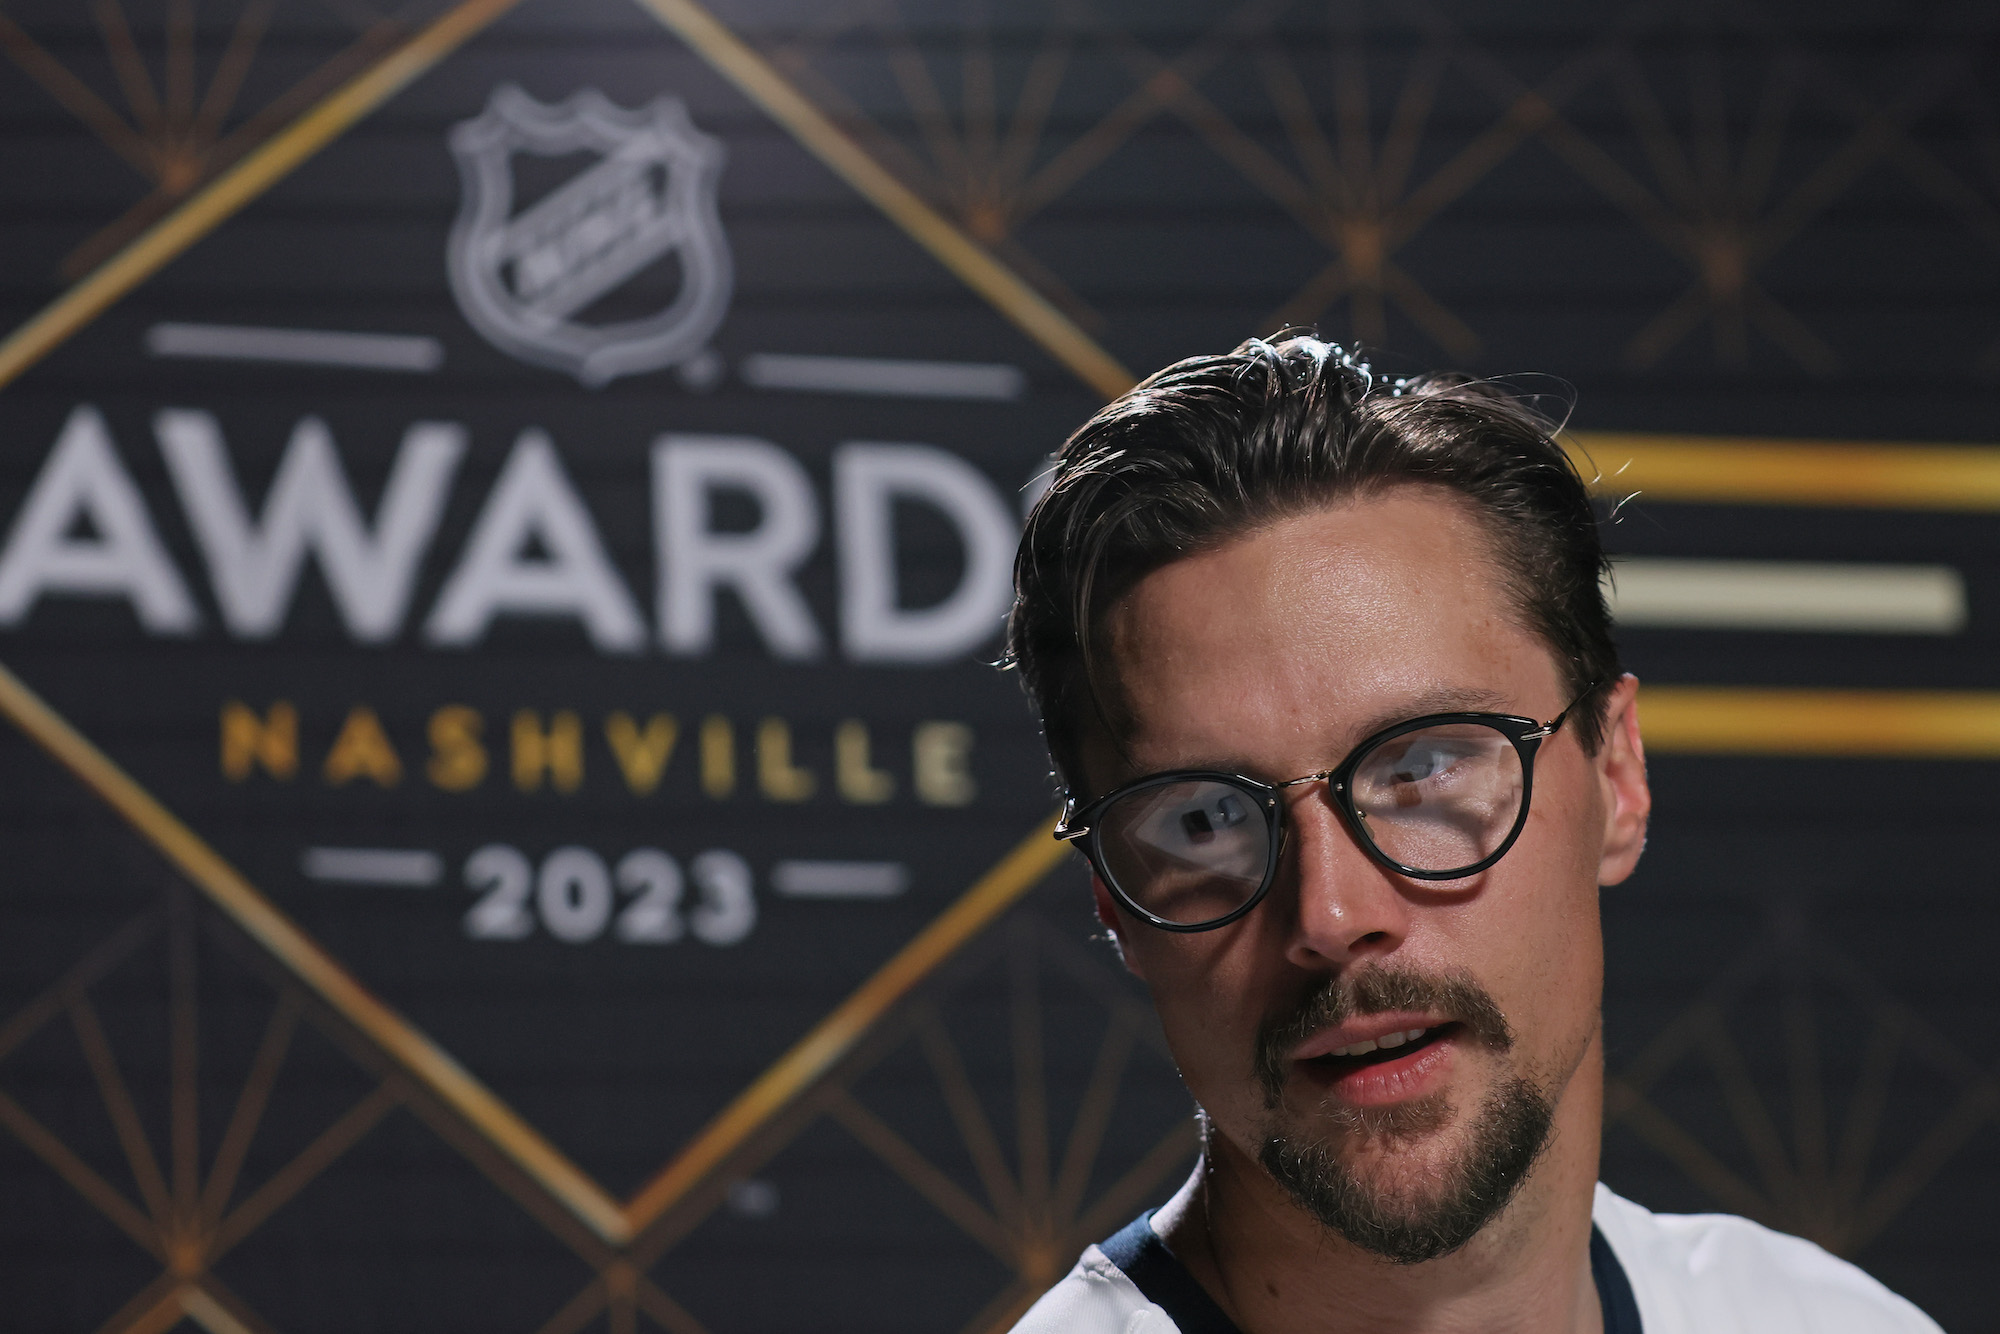 NASHVILLE, TENNESSEE - JUNE 25: Erik Karlsson of the San Jose Sharks speaks with the media at the 2023 NHL Awards player availability at the Bridgestone Arena on June 25, 2023 in Nashville, Tennessee. (Photo by Bruce Bennett/Getty Images)